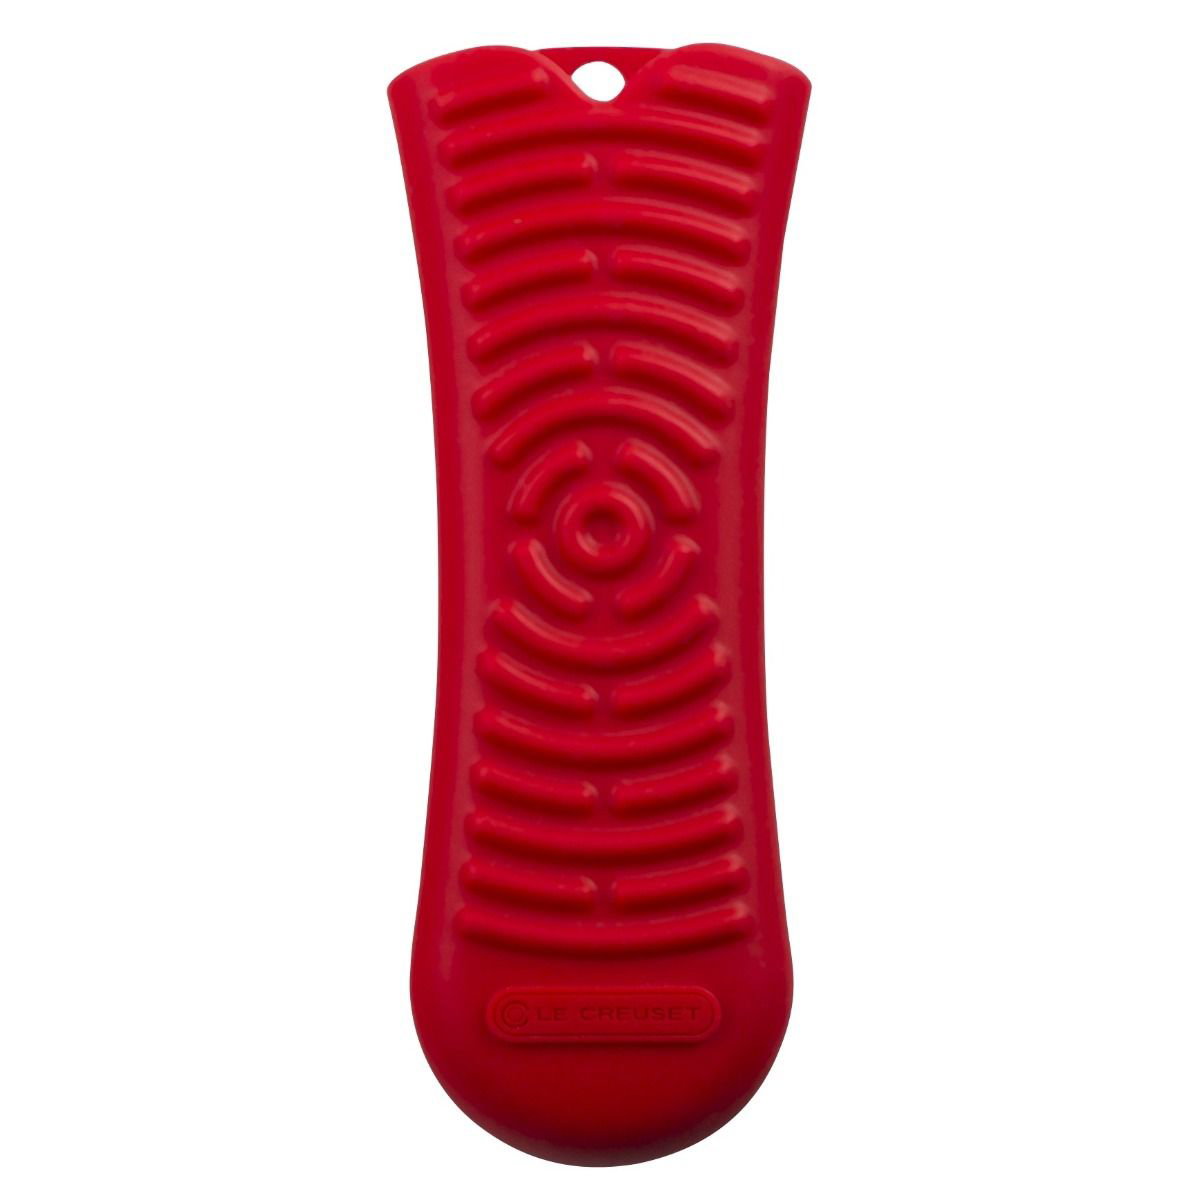 Le Creuset Silicone Handle Grips (Set of 2)